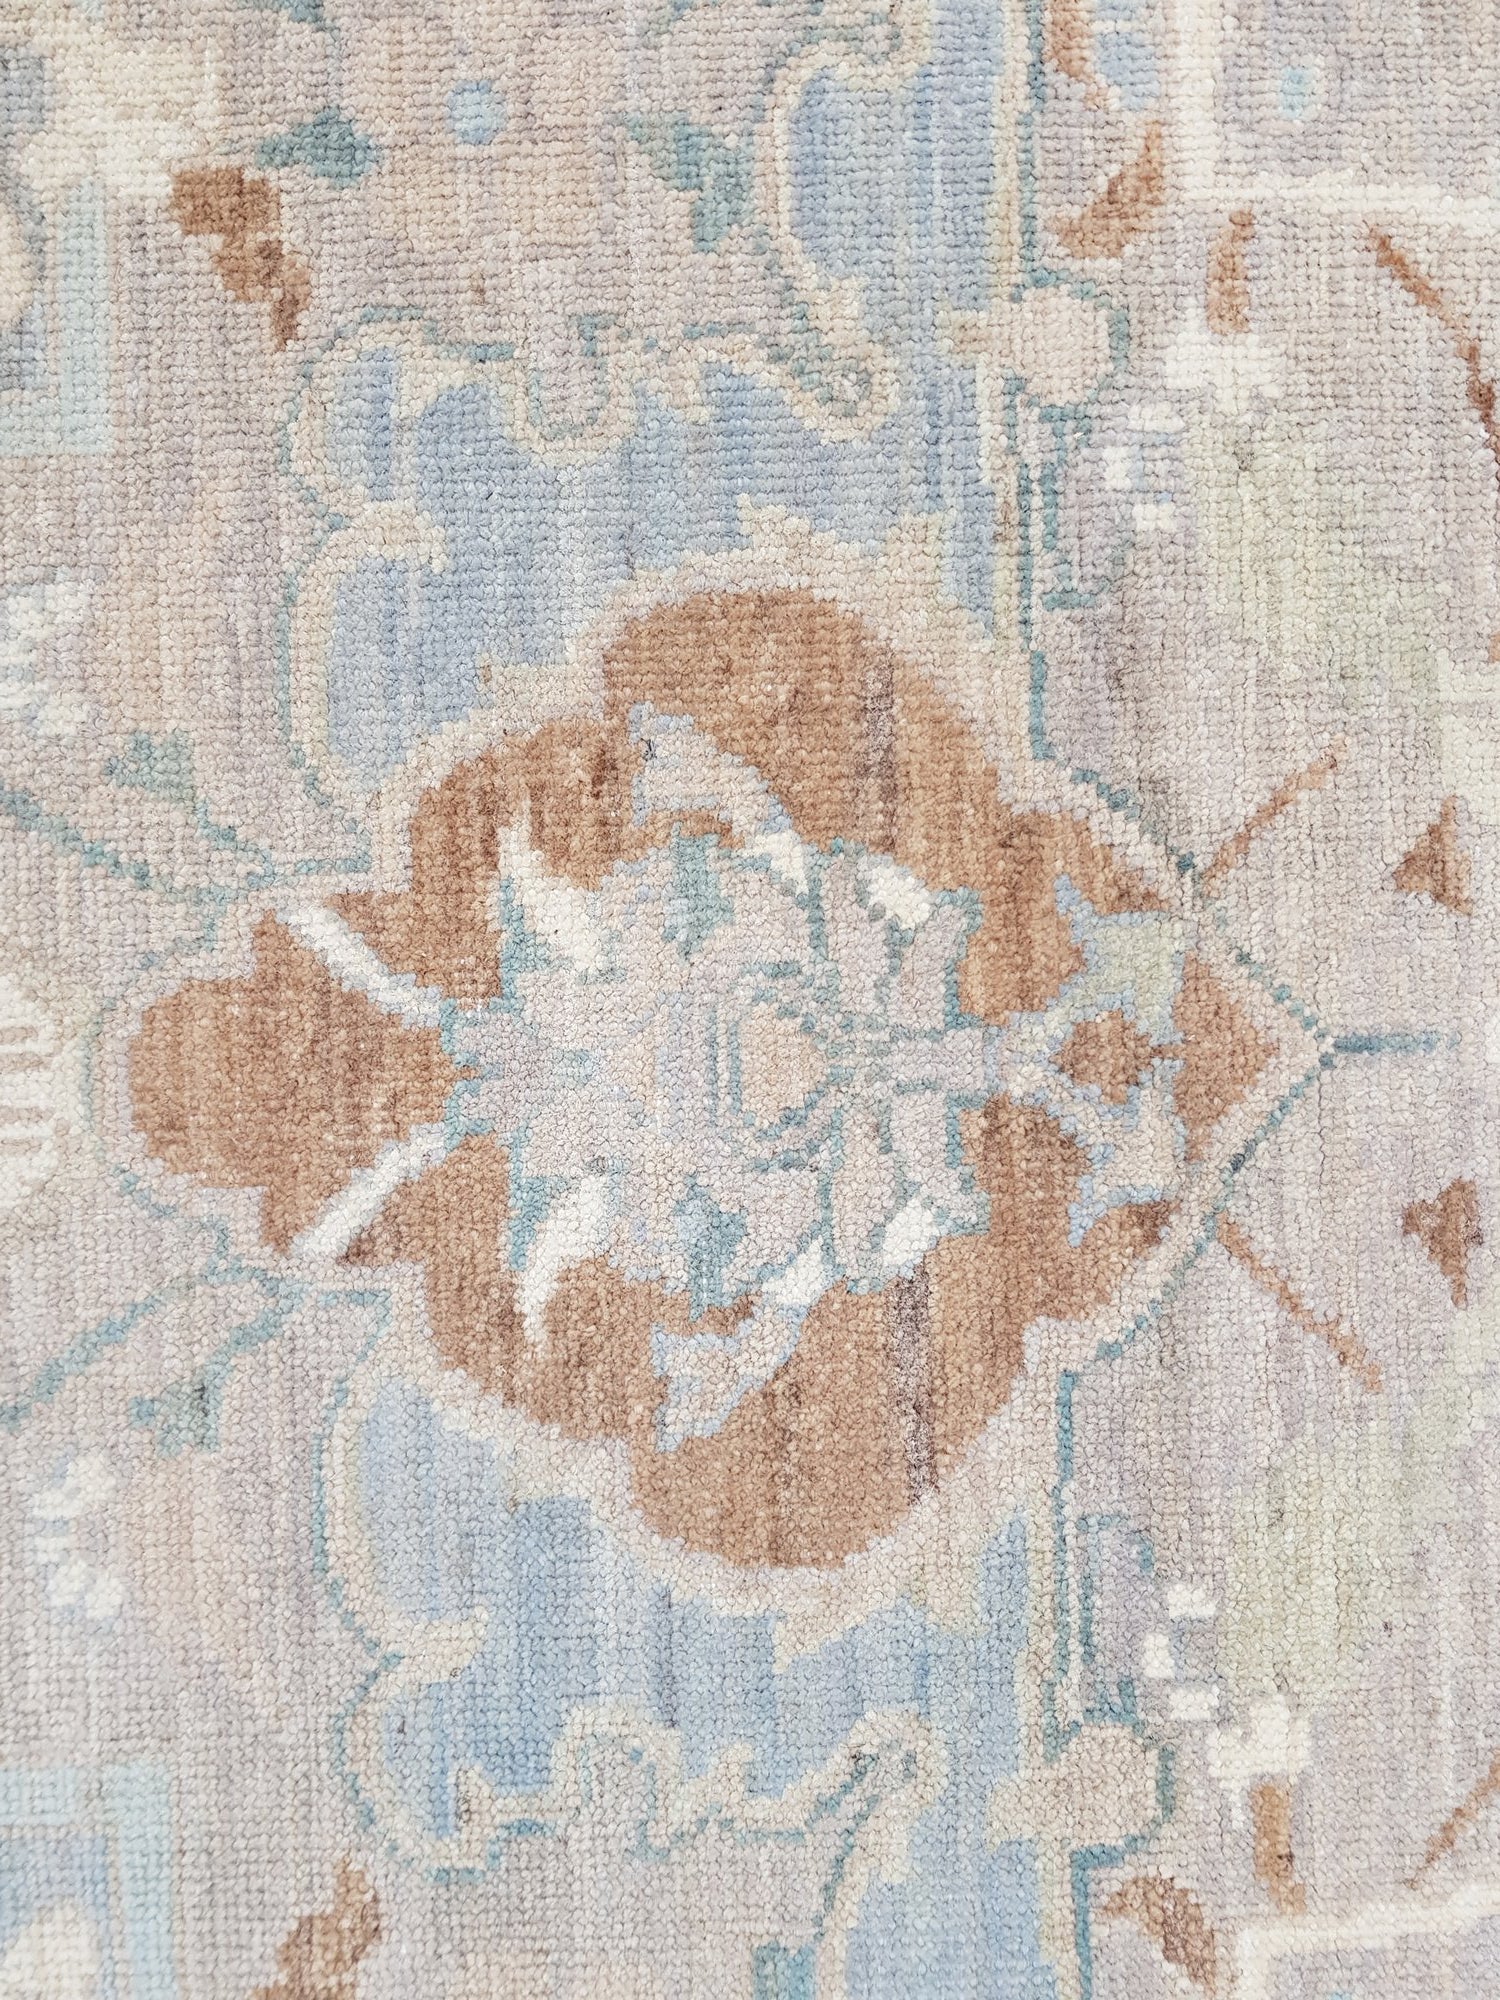 Classical Handwoven Transitional Rug, J64132